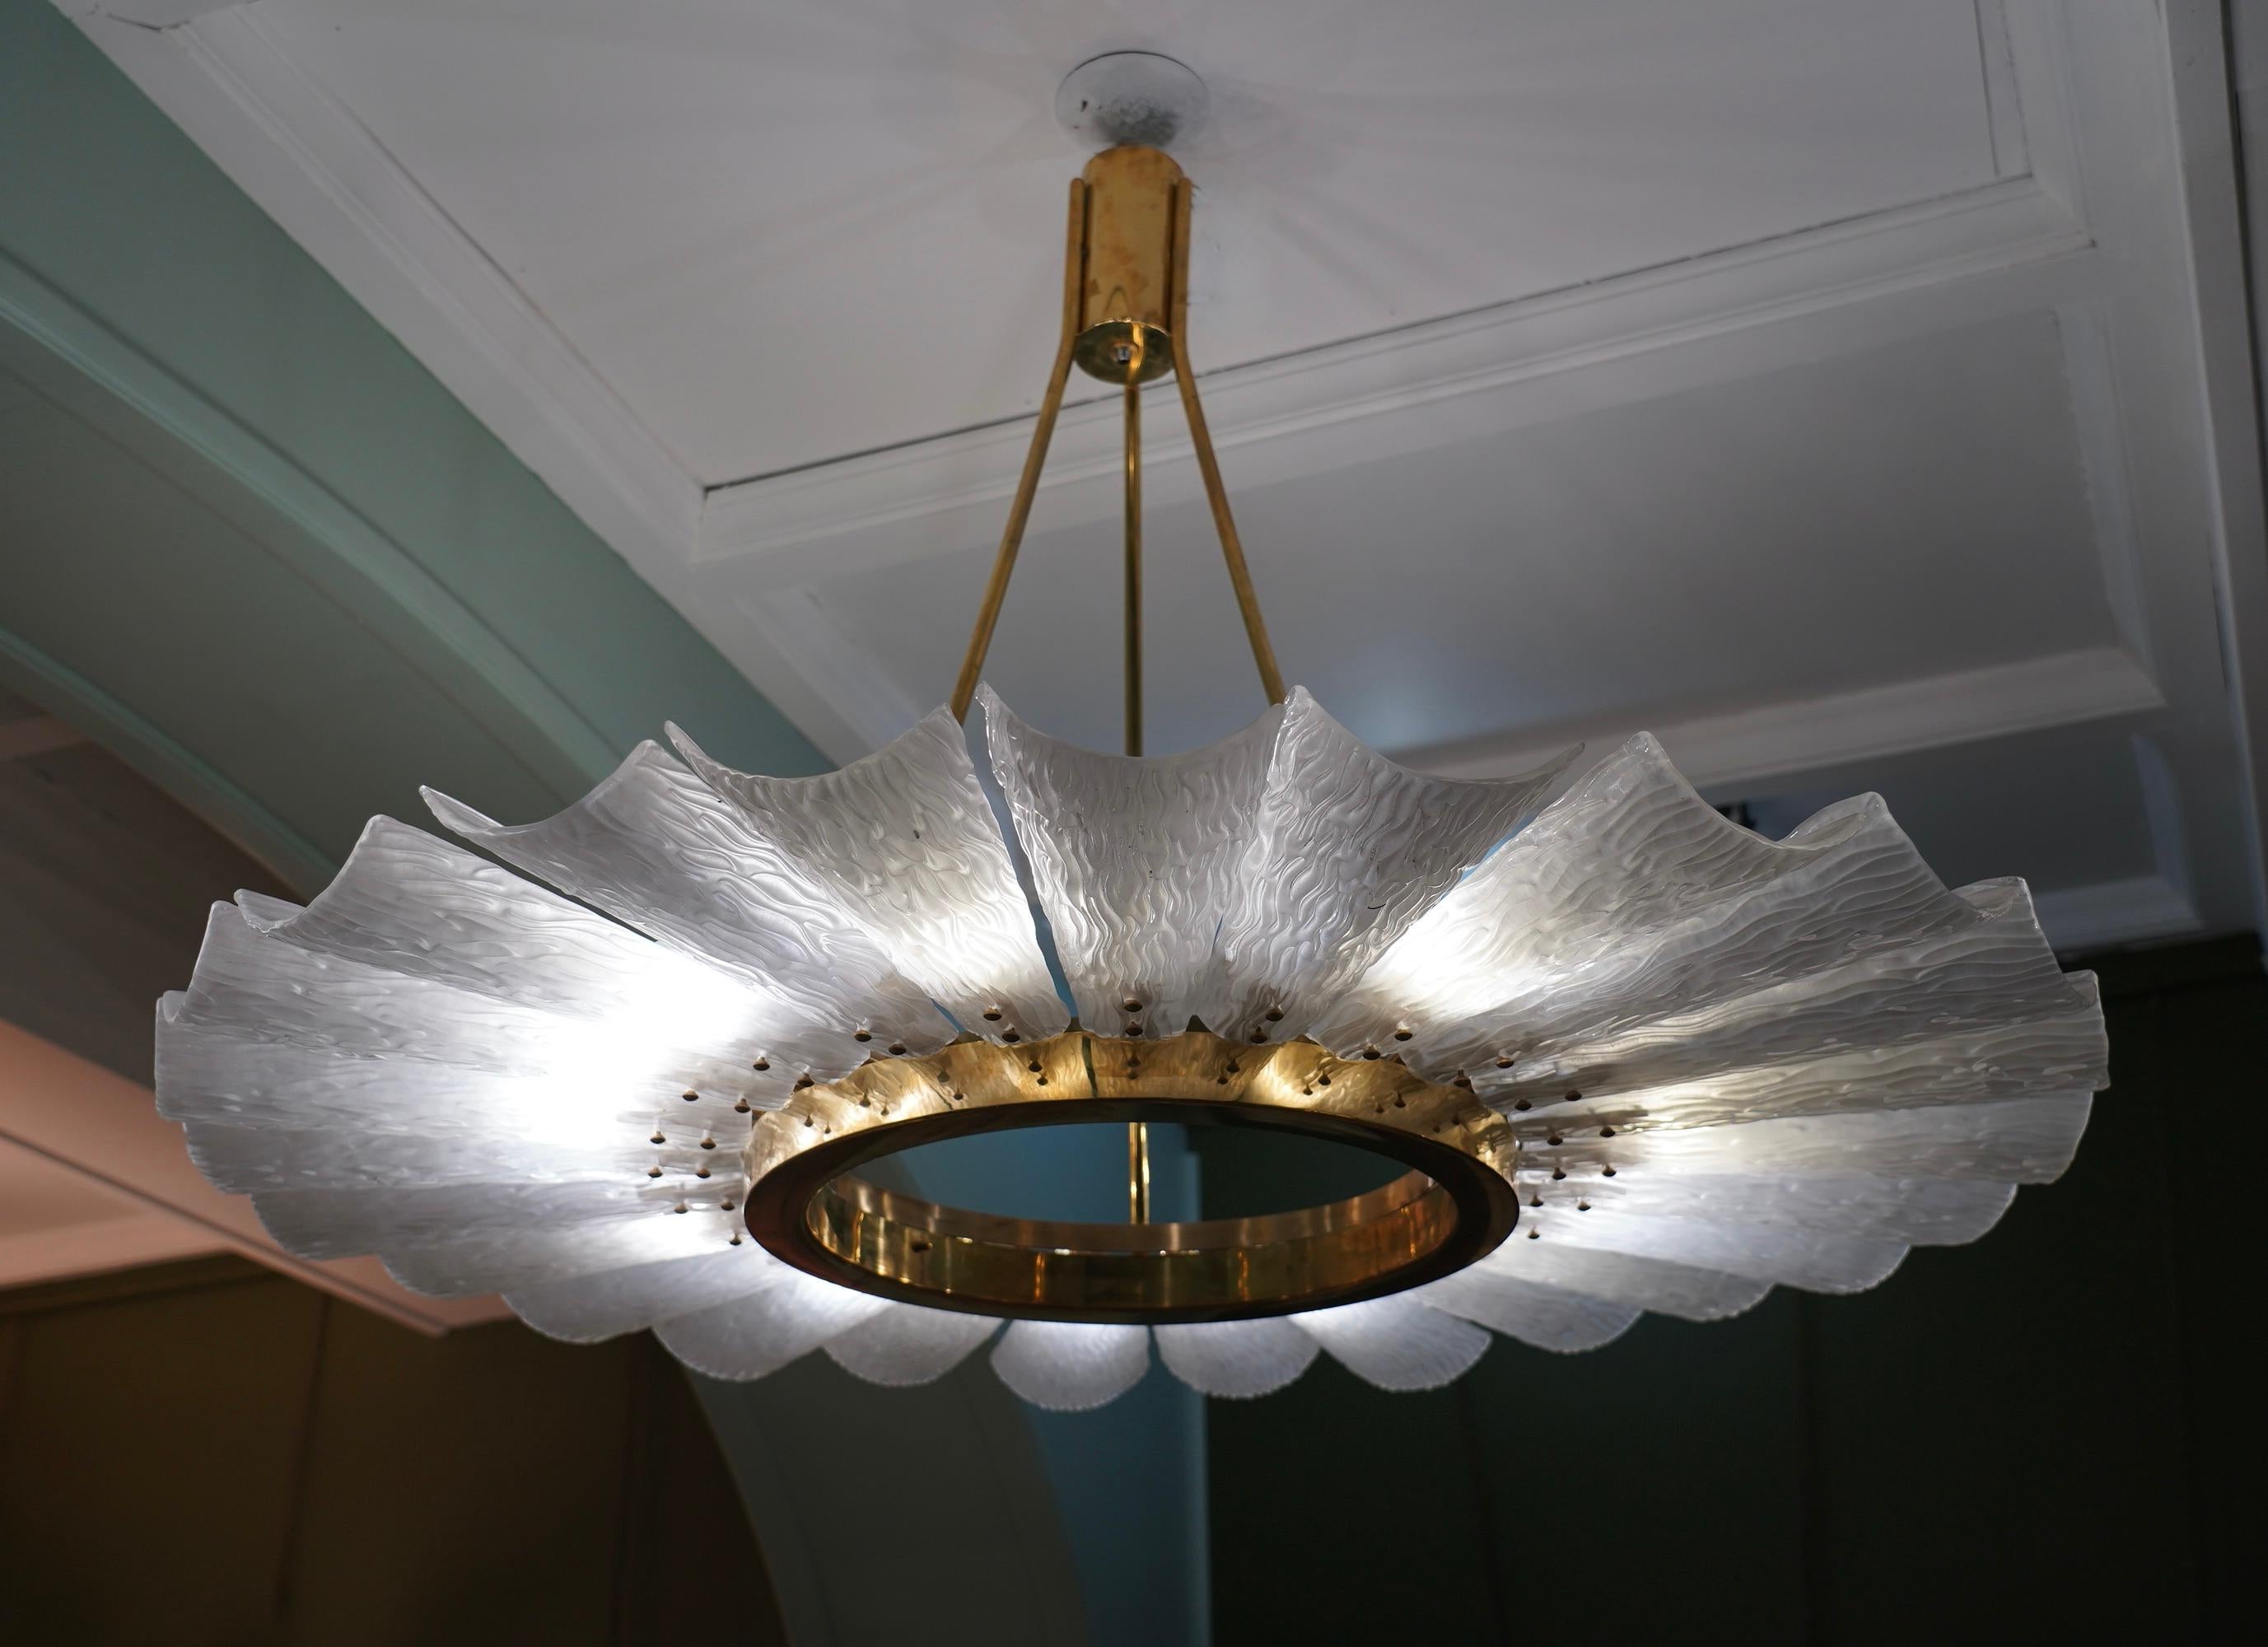 Particular circular chandelier, with brass structure and Murano glass tiles. It looks like a system of planets gravitating circularly. A chandelier with a one-of-a-kind design, lots of brass and sandblasted artistic glass.

The chandelier with an